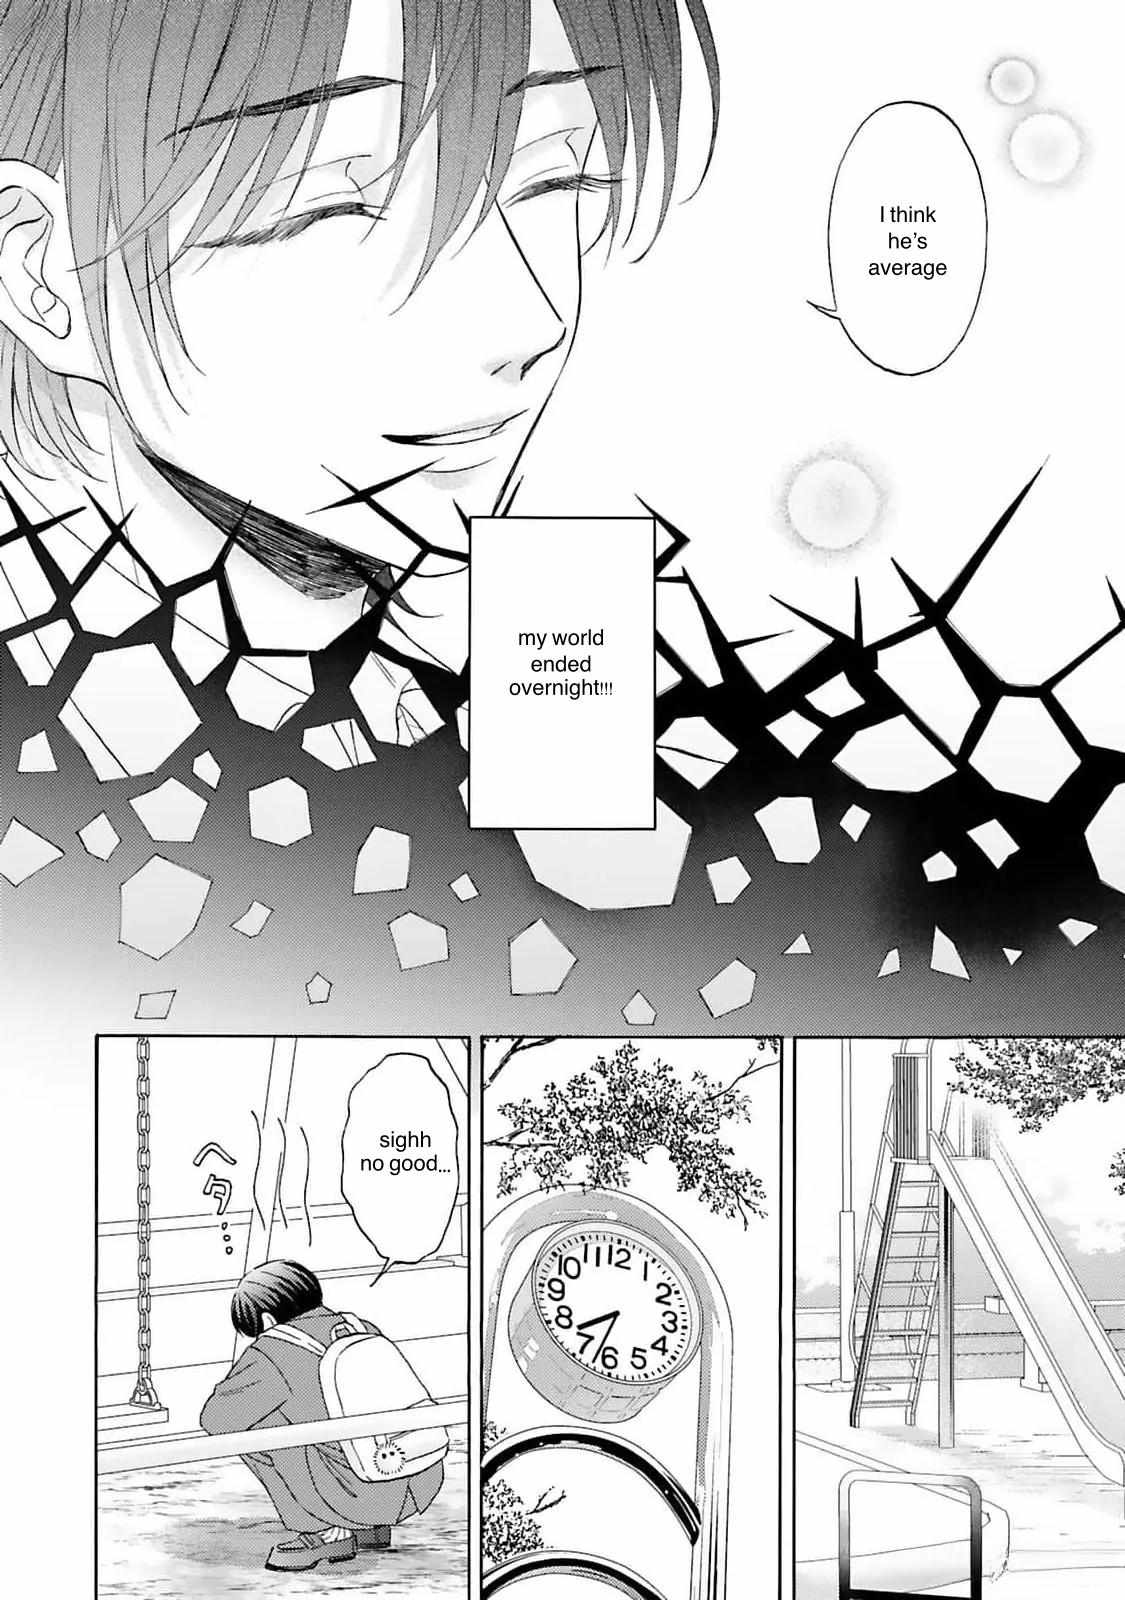 My Cutie Pie -An Ordinary Boy And His Gorgeous Childhood Friend- 〘Official〙 - chapter 4 - #4